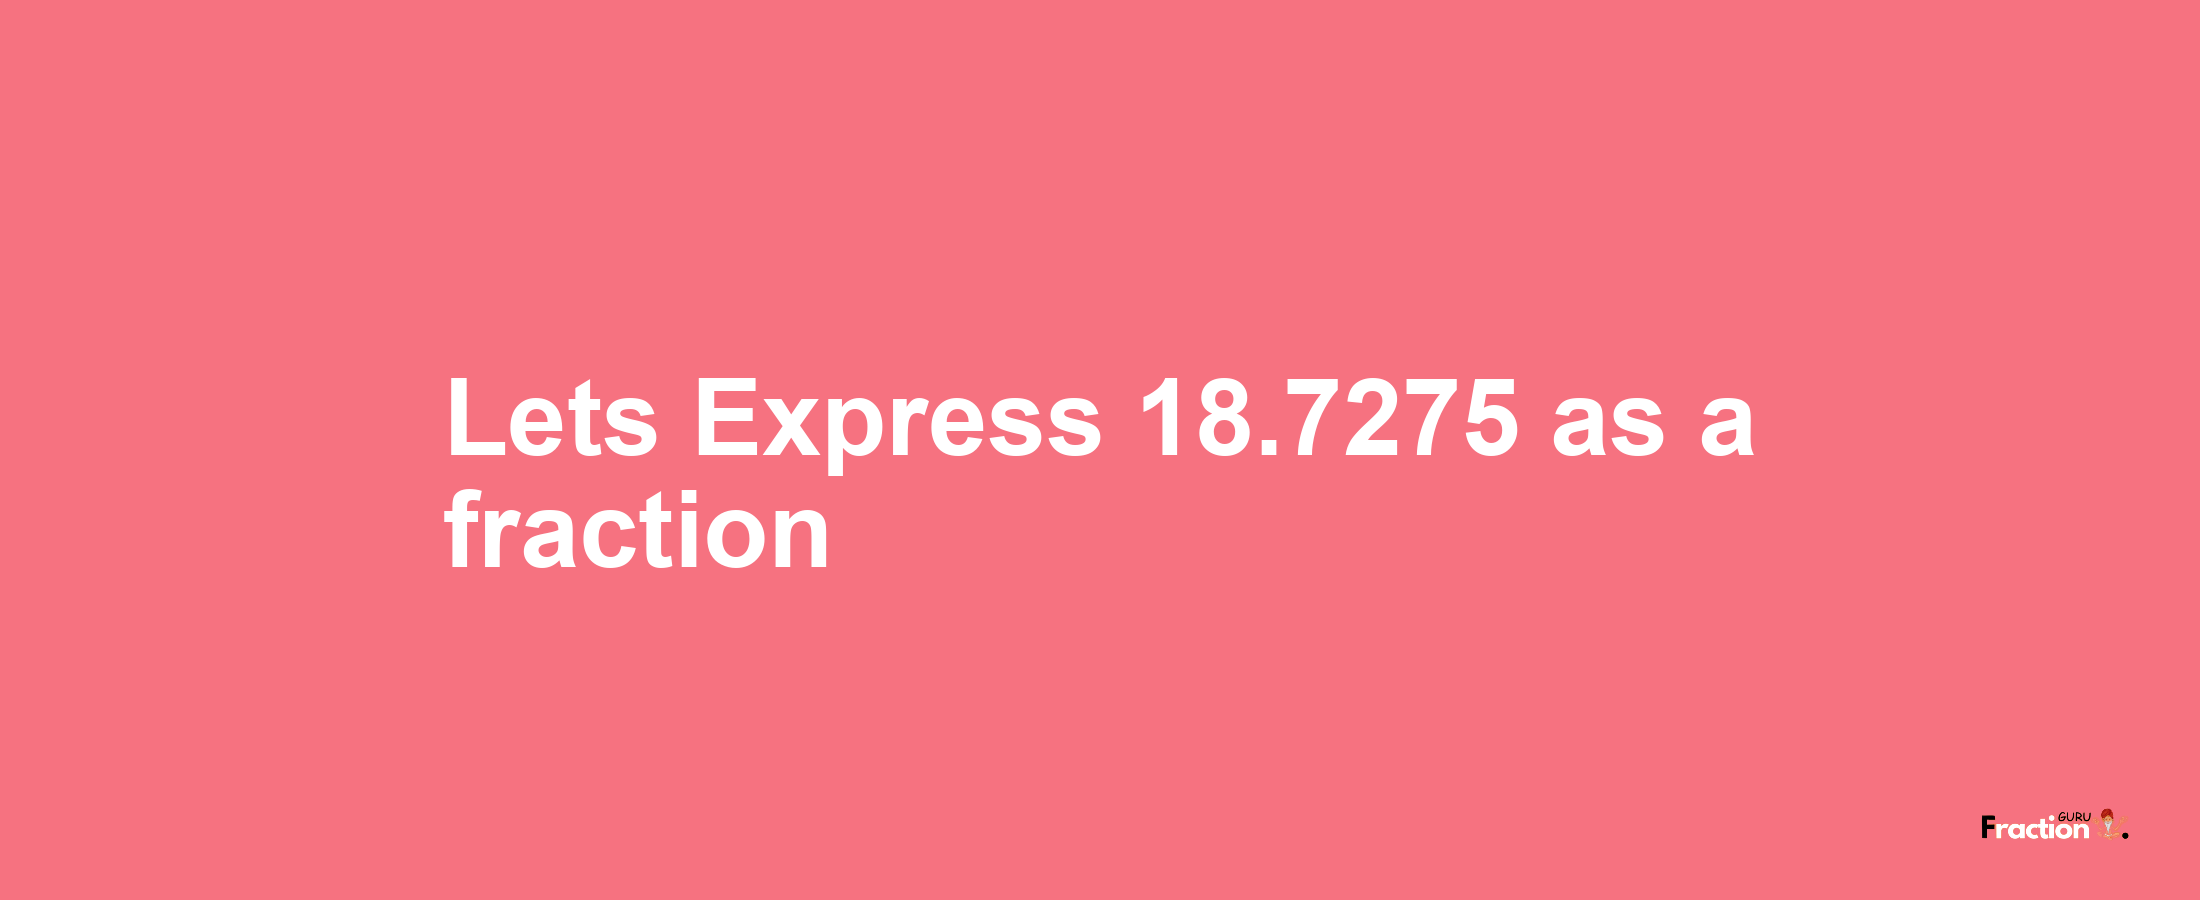 Lets Express 18.7275 as afraction